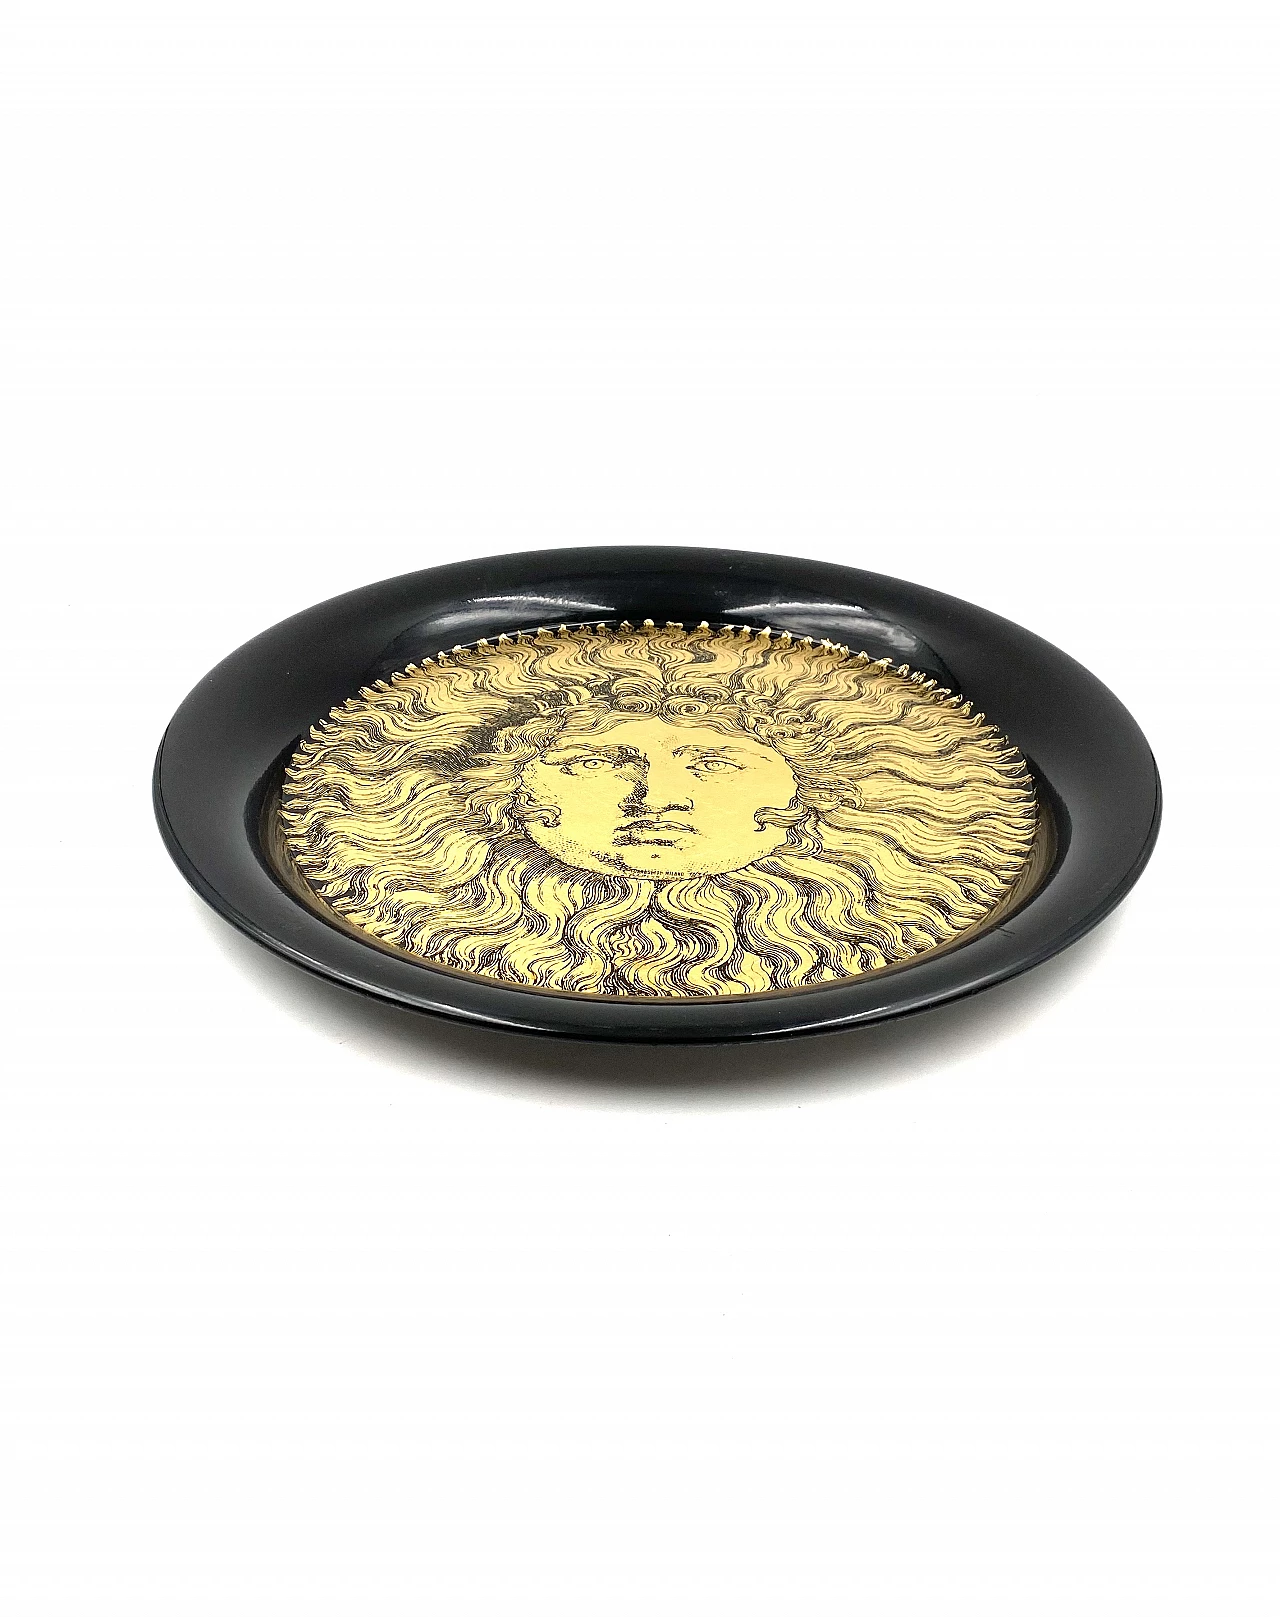 Metal Re Sole tray by Piero Fornasetti, 1950s 10